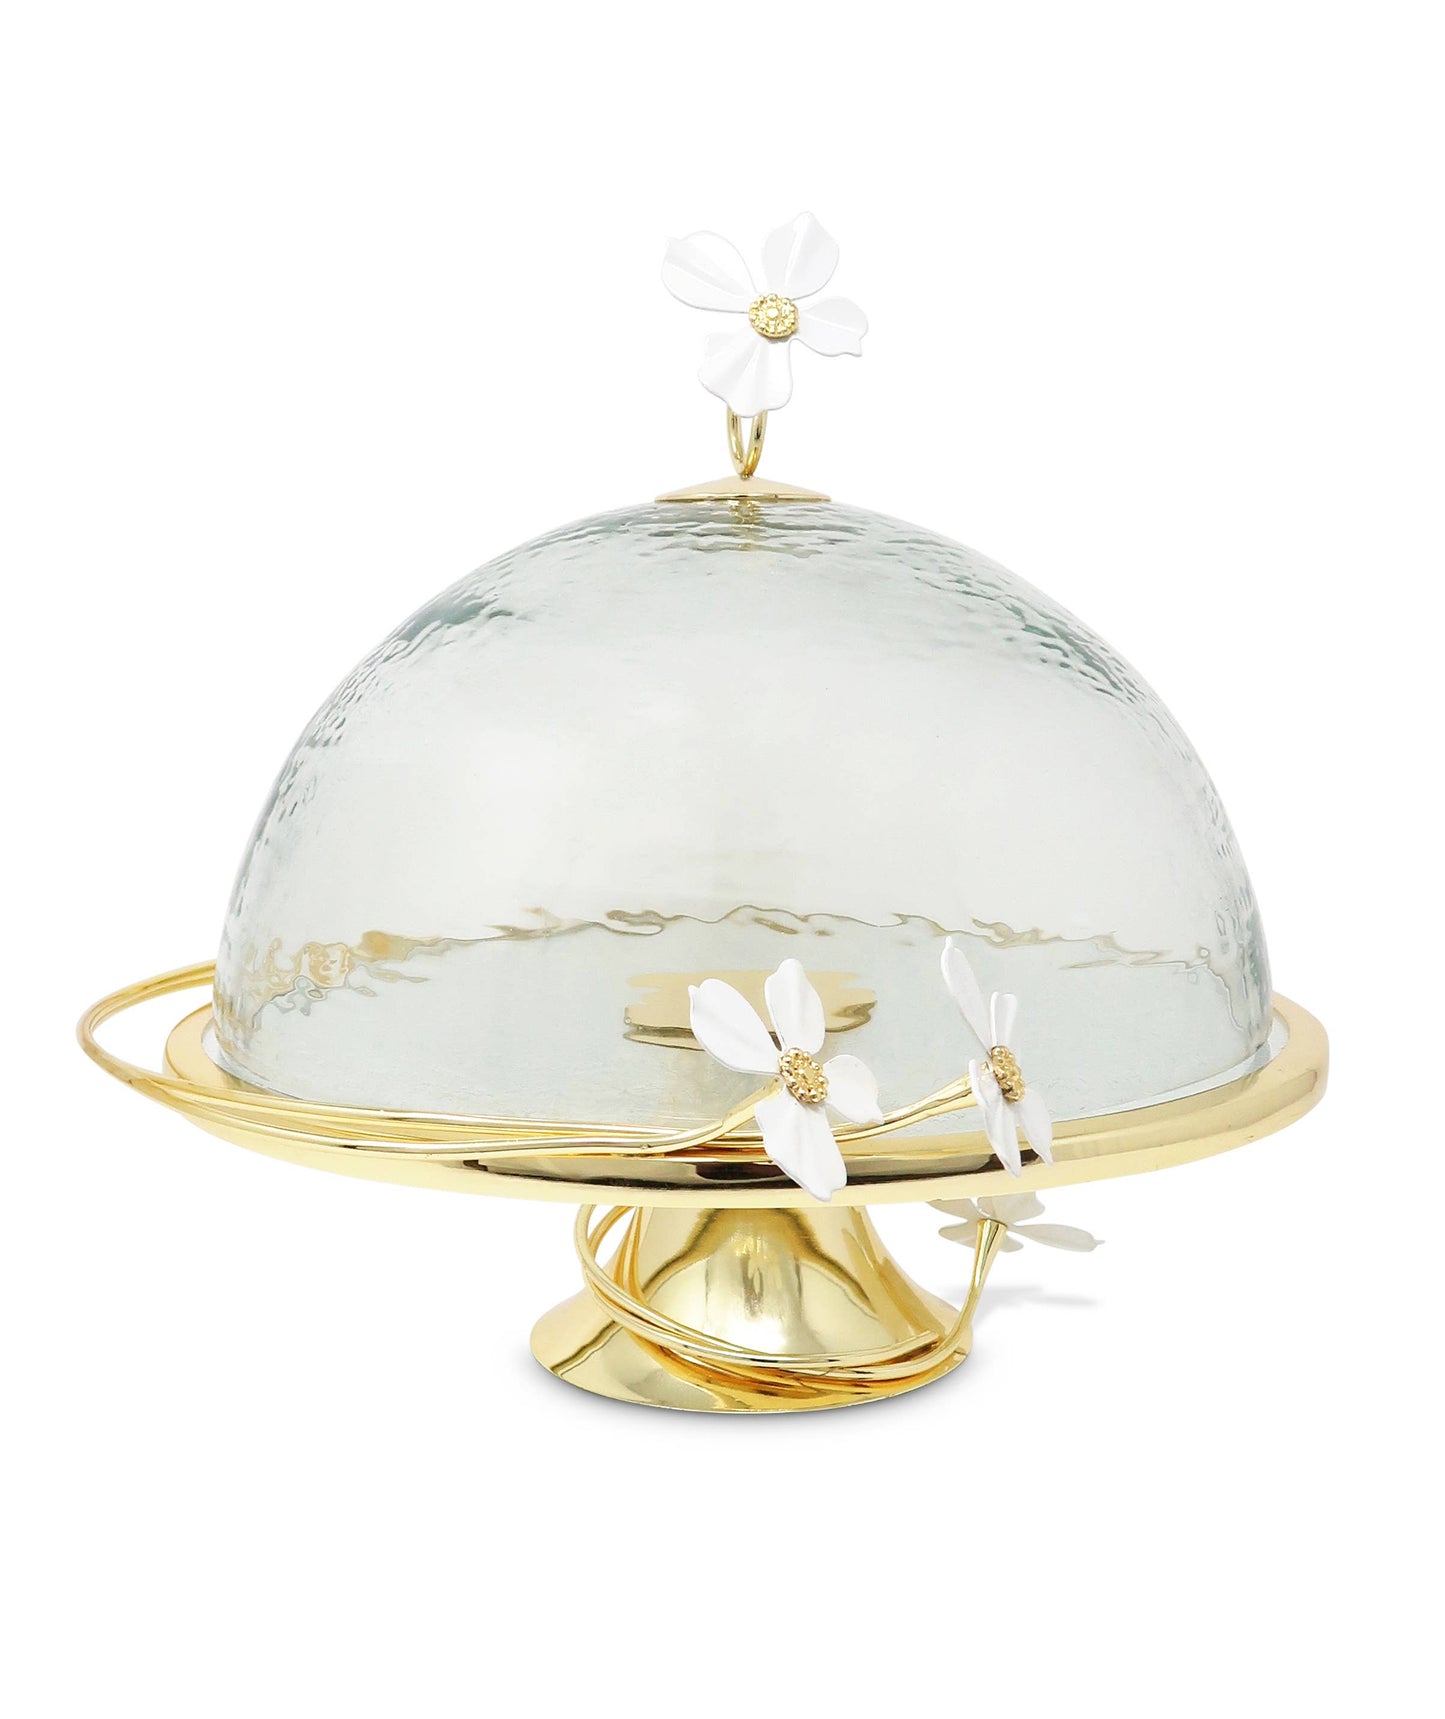 Gold Base Cake Stand and Platter Glass Cover w Jewel Flower